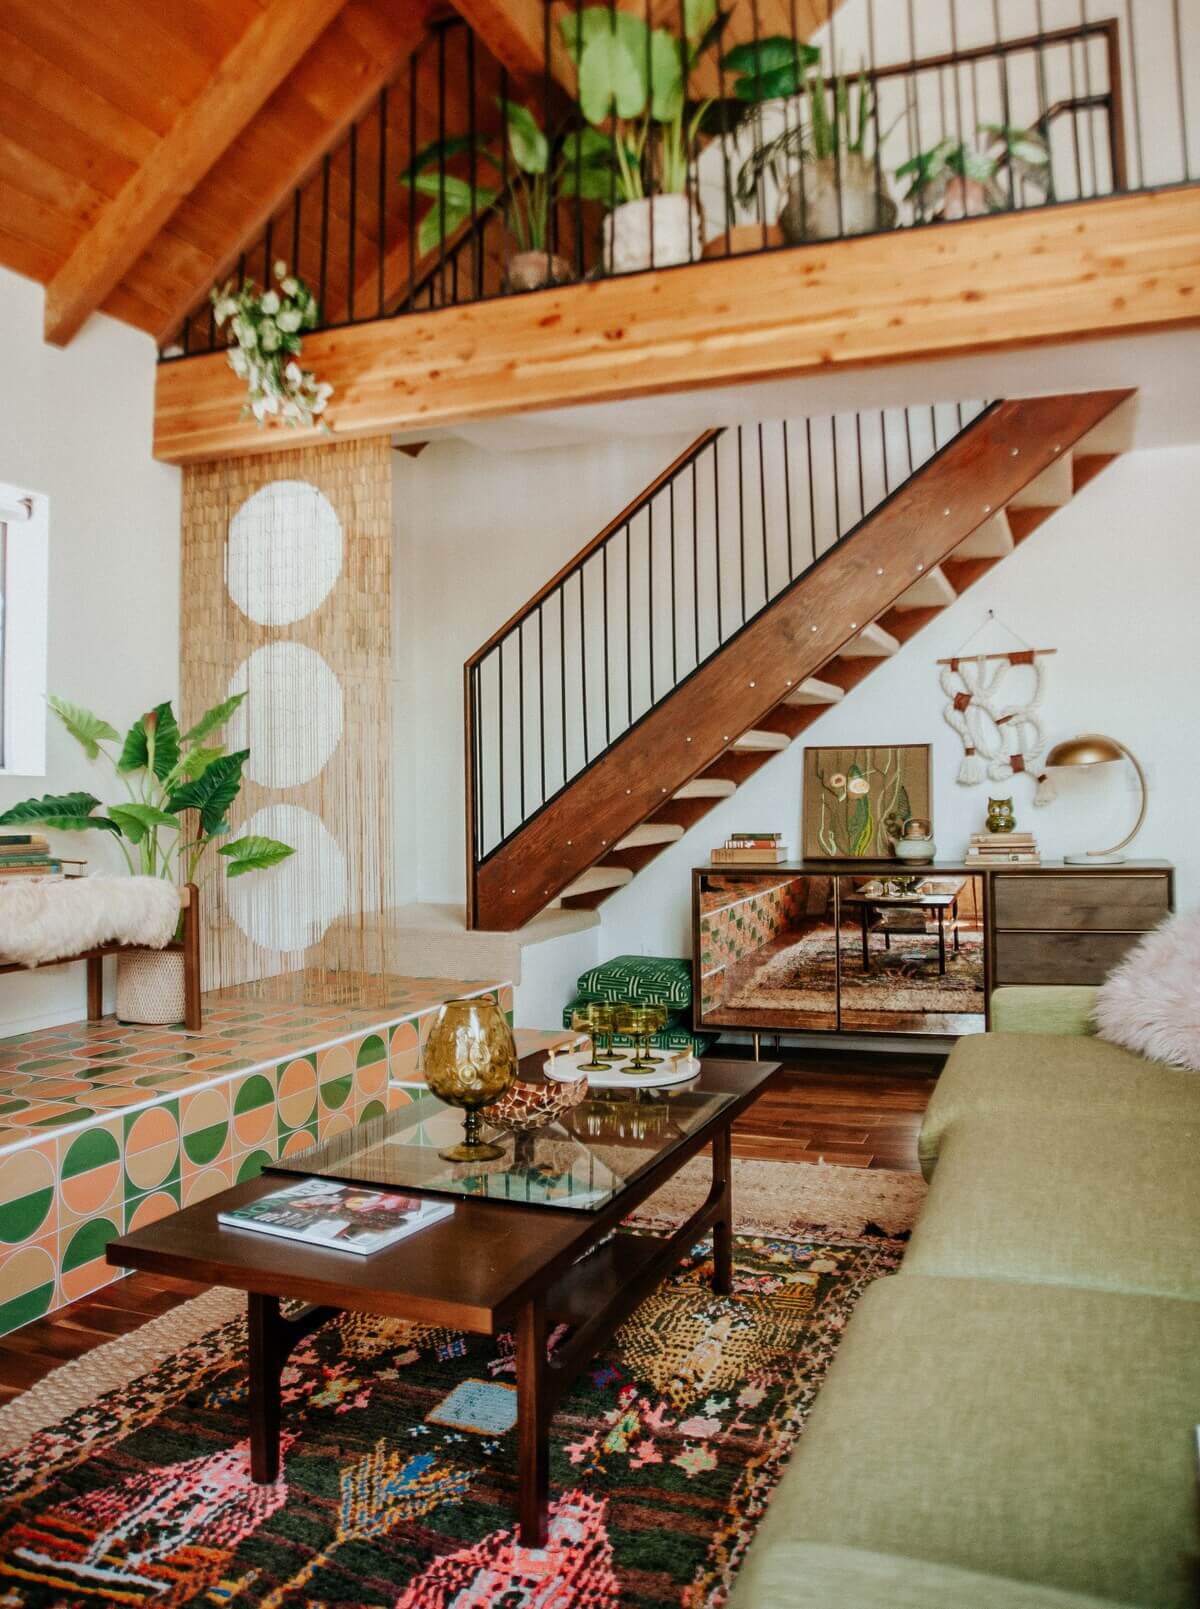 The Kitchy Cabin: A Lovely Airbnb Home in California